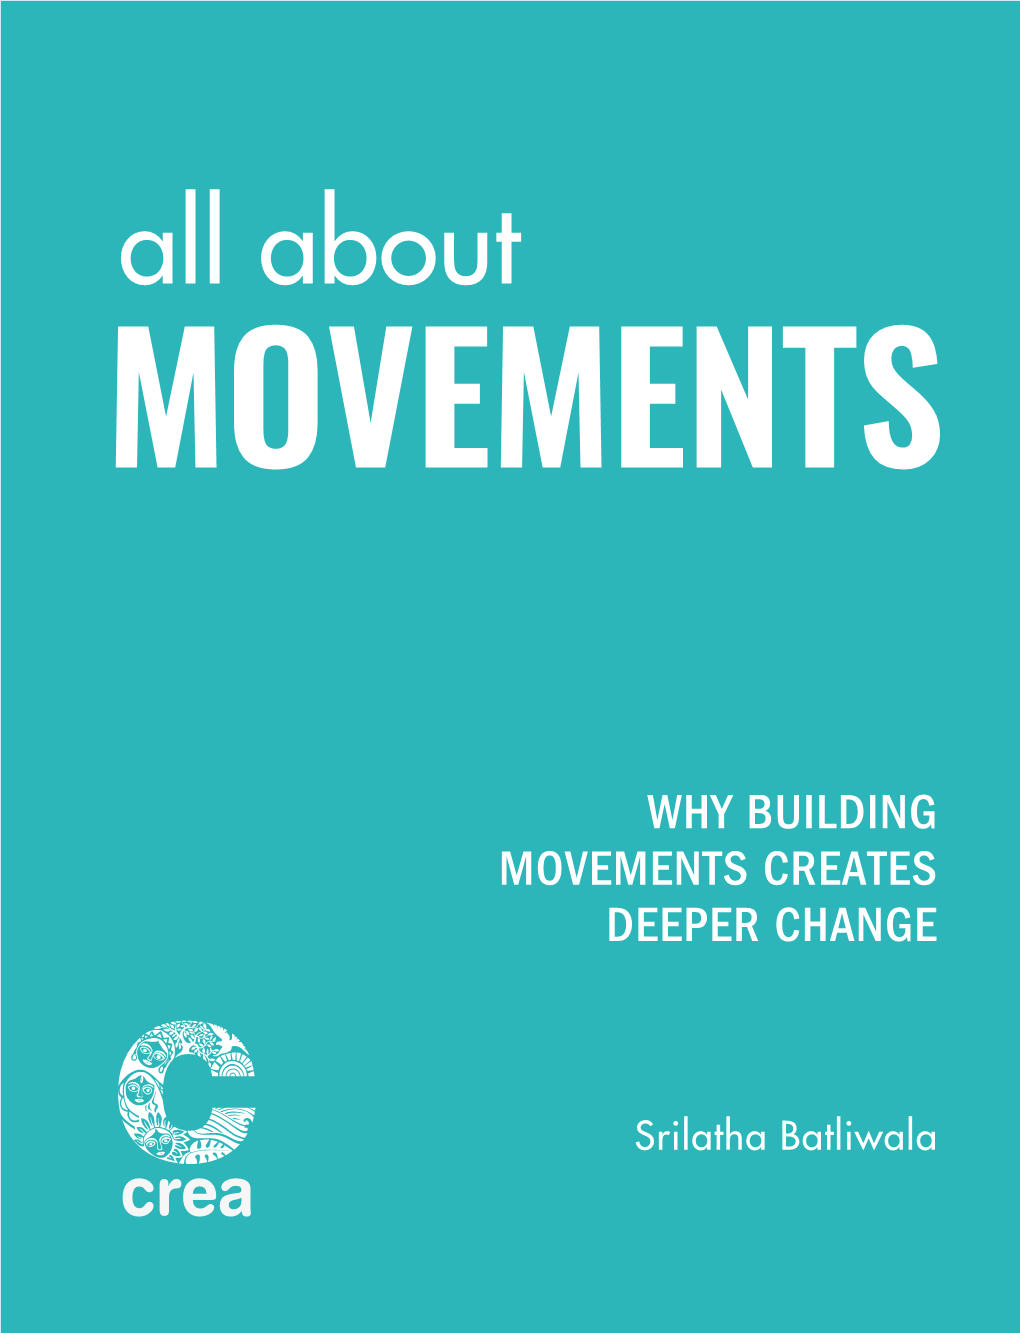 About Movements